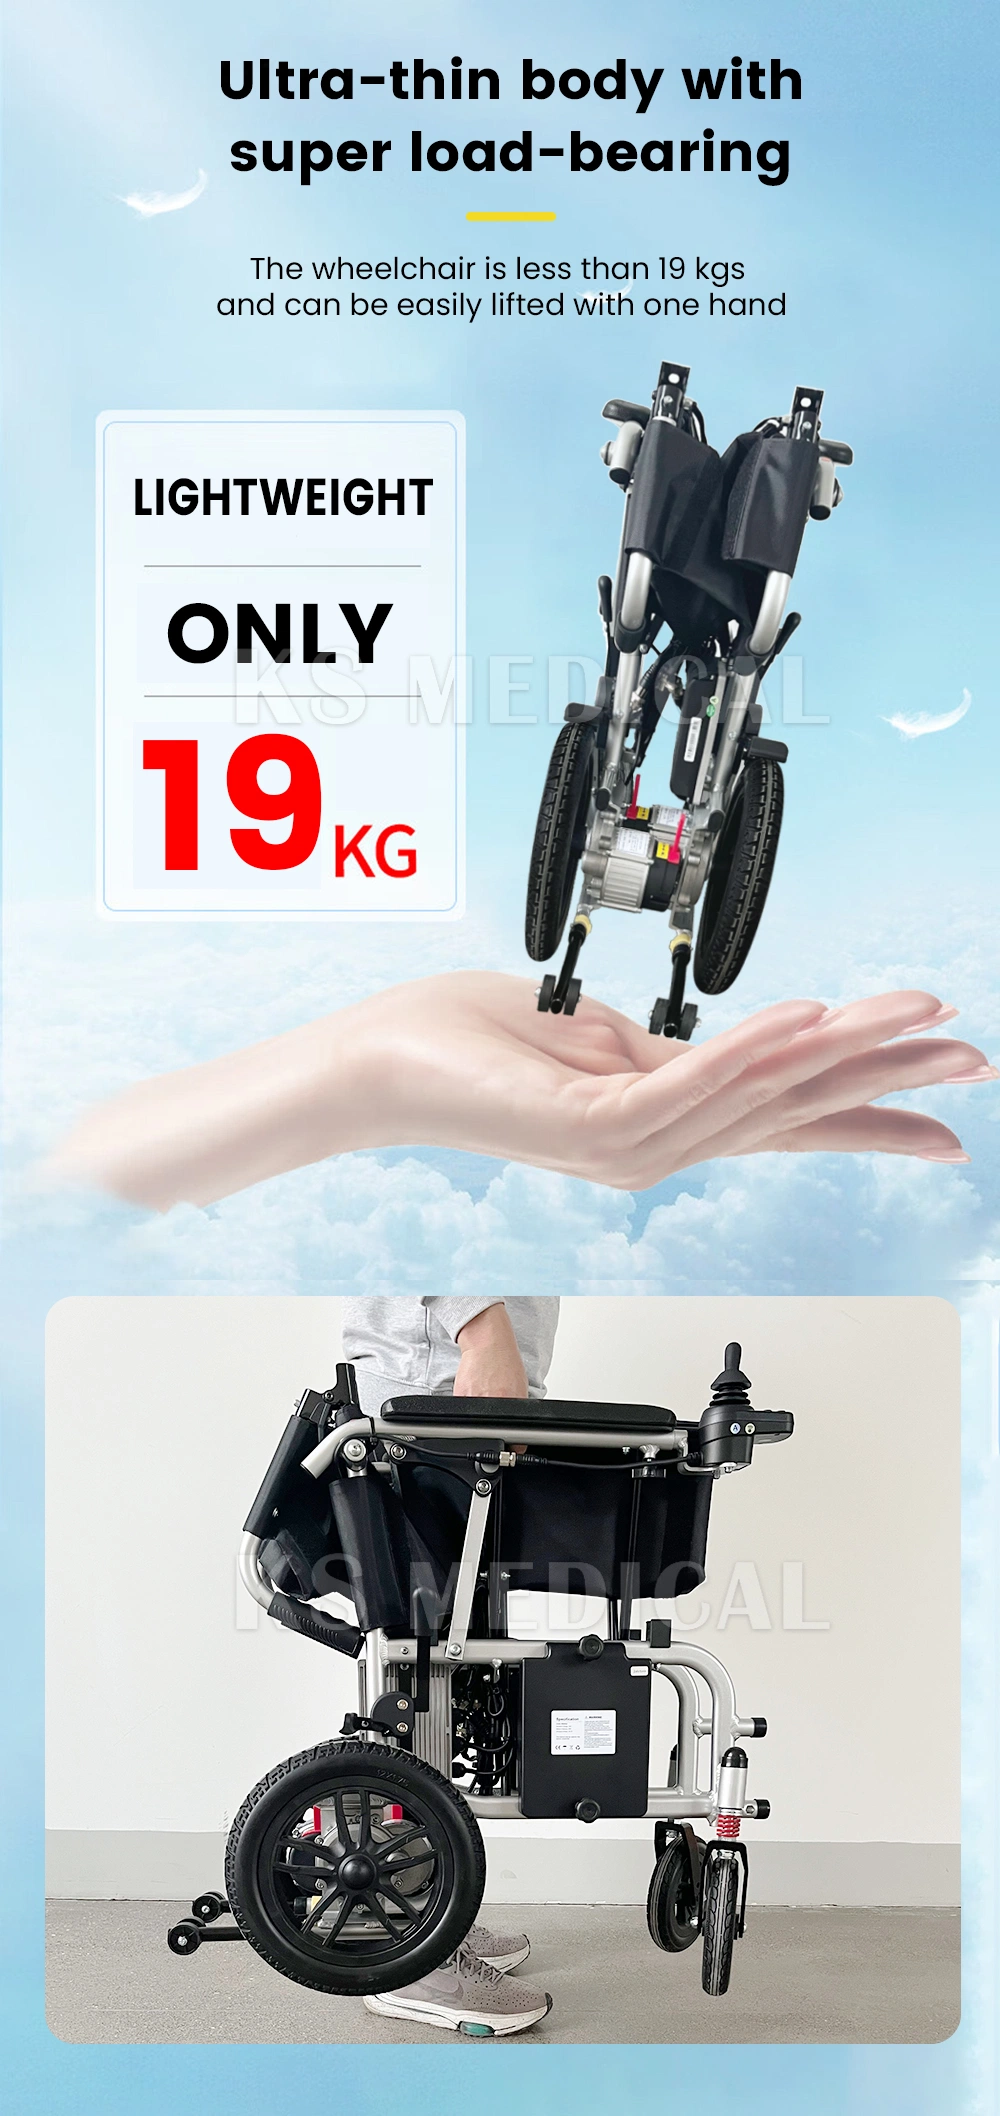 Ksm-509 Buy Portable Lightweight Only 16.5 Kgs Foldable Electric Wheelchair Smart Drive Medicare Wheel Chair for Disabled